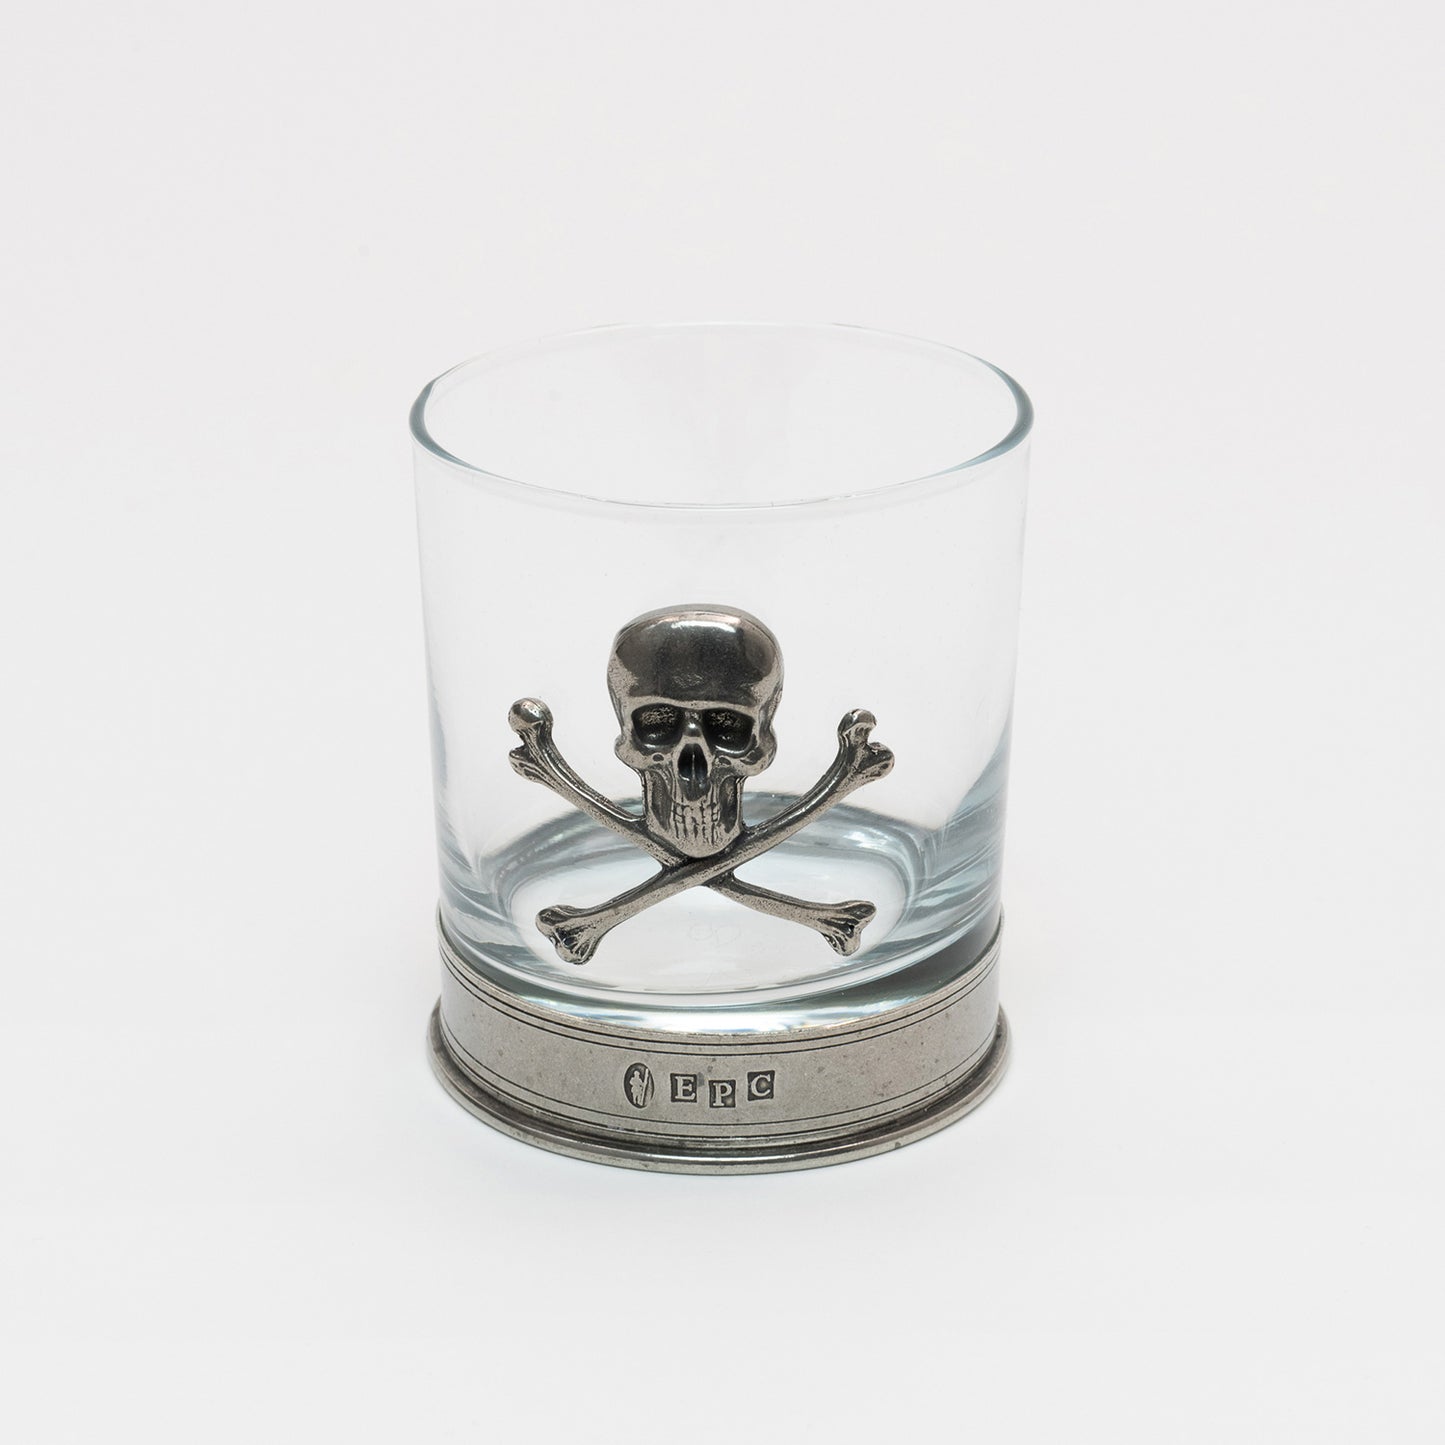 Clear glass with a pewter base and pewter skull and cross bones on the side of the tumbler.